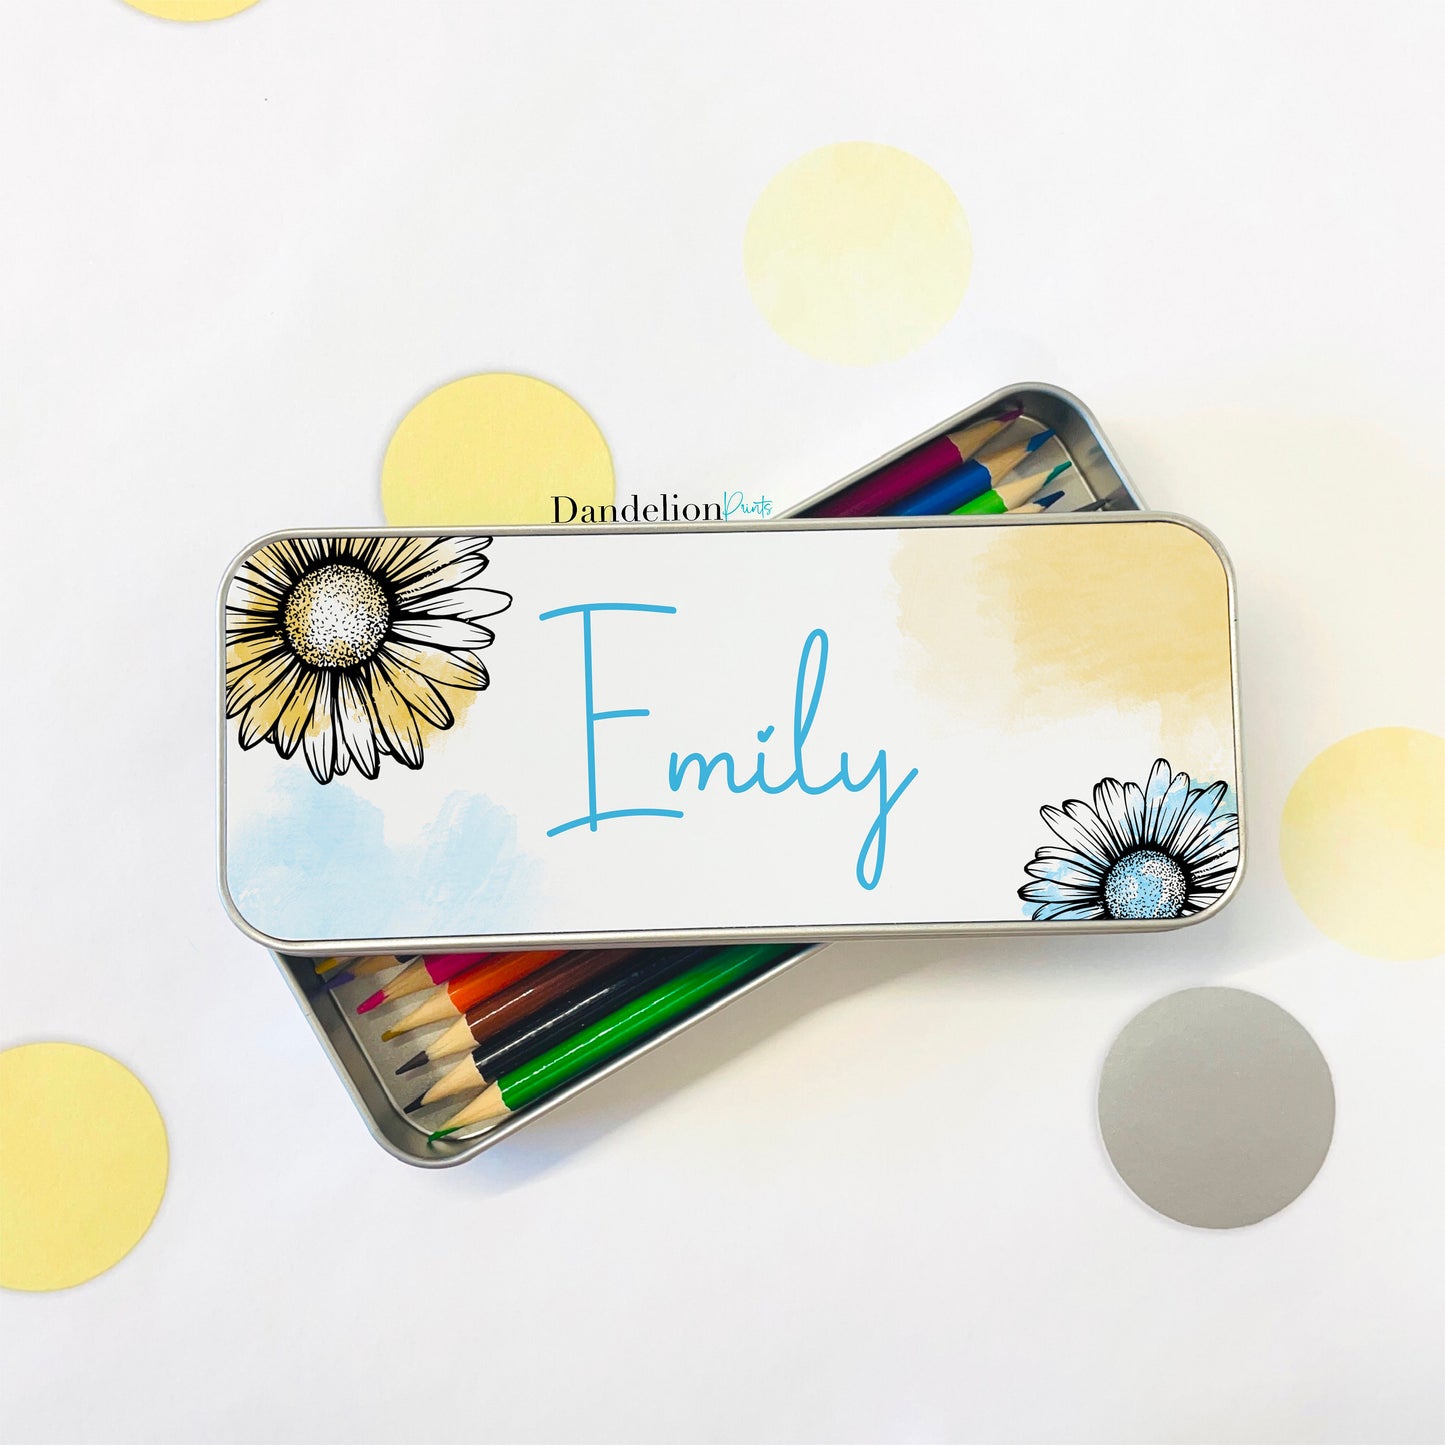 This is a pretty pencil tin with blue and yellow watercolour splashes. In the top left and bottom right corners are a pink and yellow outline daisy with a water colour splash. This pen or pencil tin is printed with a name in the middle.